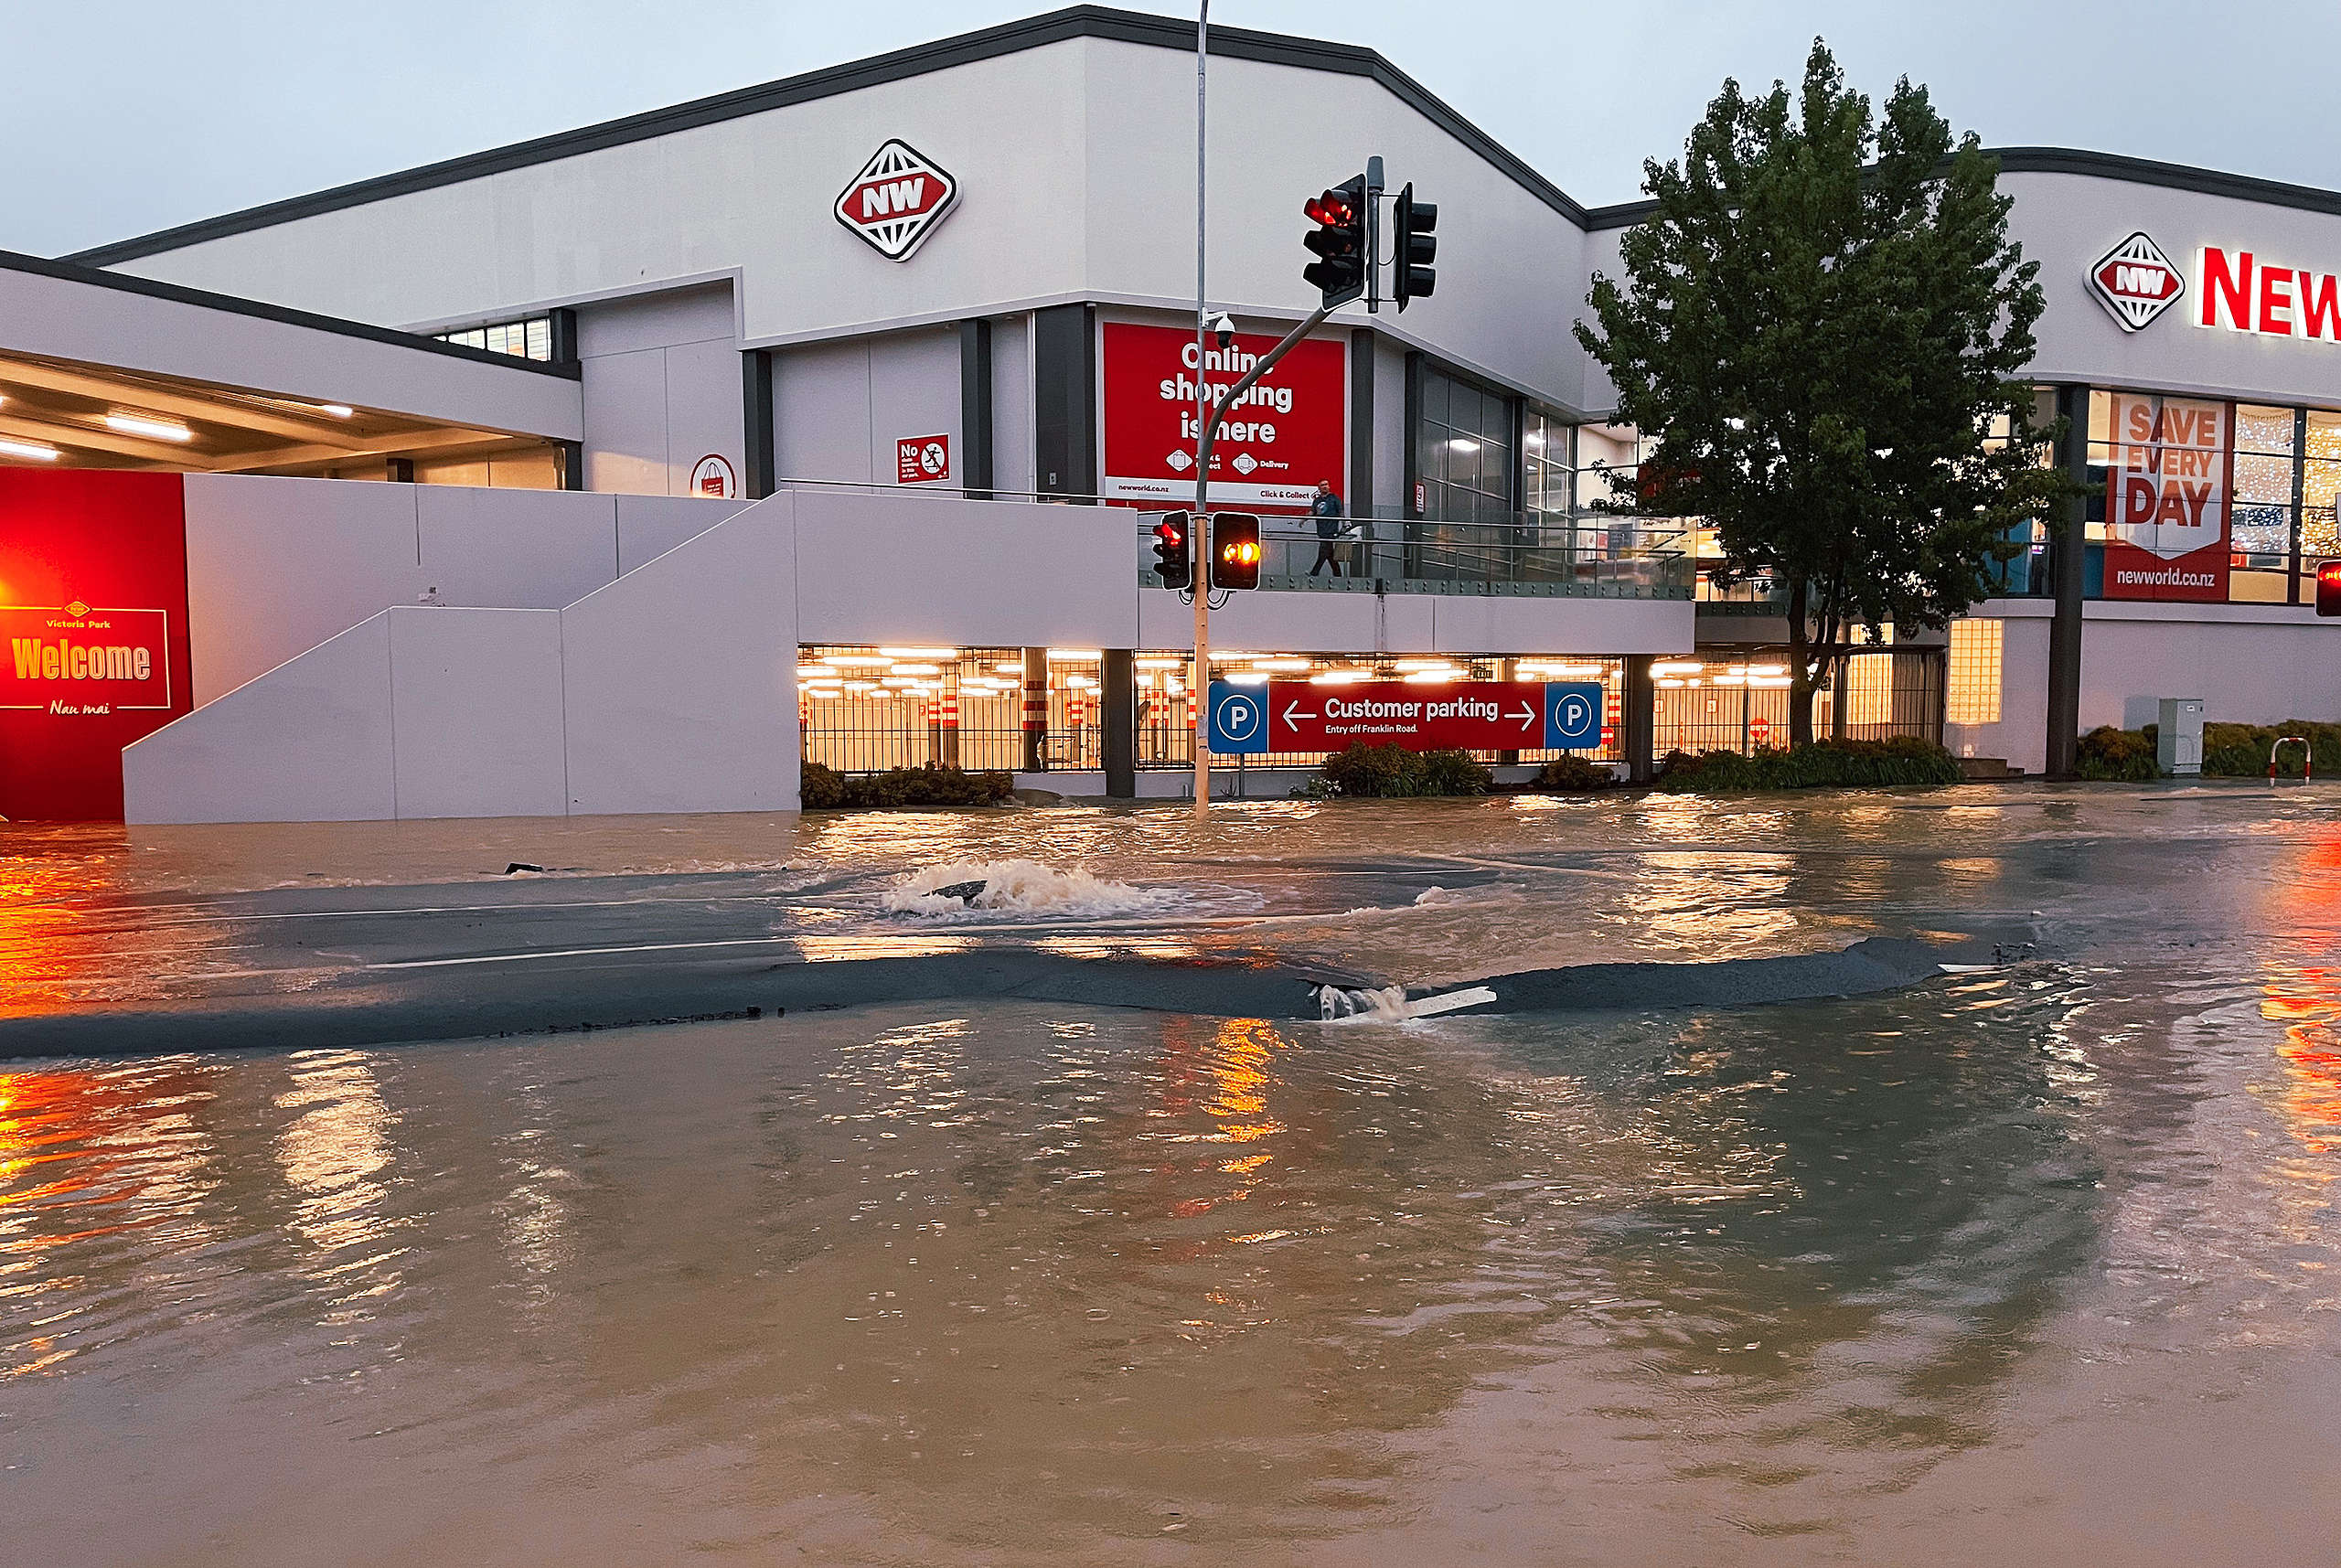 AUCKLAND, NEW ZEALAND - JANUARY 27: A general view of a flooded Victoria Street on January 27, 2023 in Auckland, New Zealand. Heavy rainfall, the most rain ever recorded in one day according to New Zealand’s MetService has caused flash flooding and evacuations across the Auckland region. (Photo by Lynn Grieveson/Getty Images)